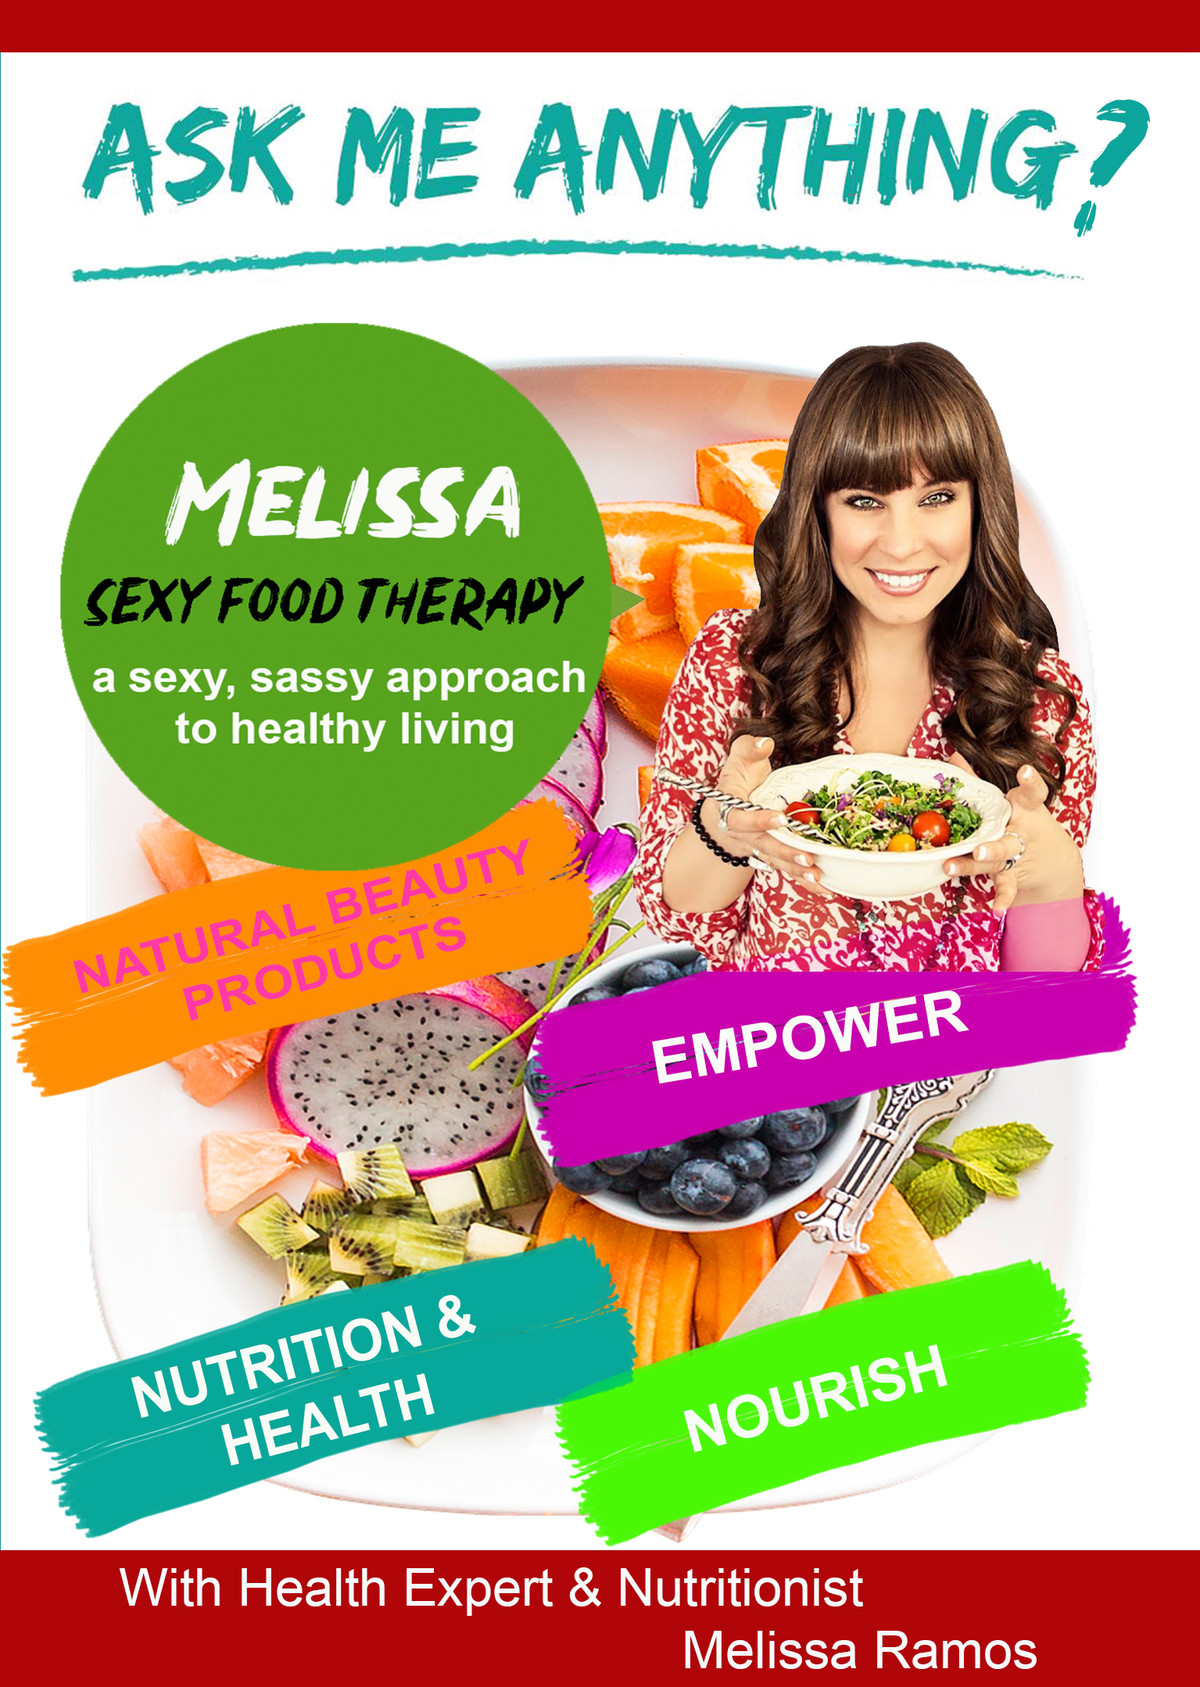 K4842 - Ask Me Anything about Sexy Food Therapy with Health Expert Melissa Ramos  - Learn How To Eat Right & Improve Your Digestive System